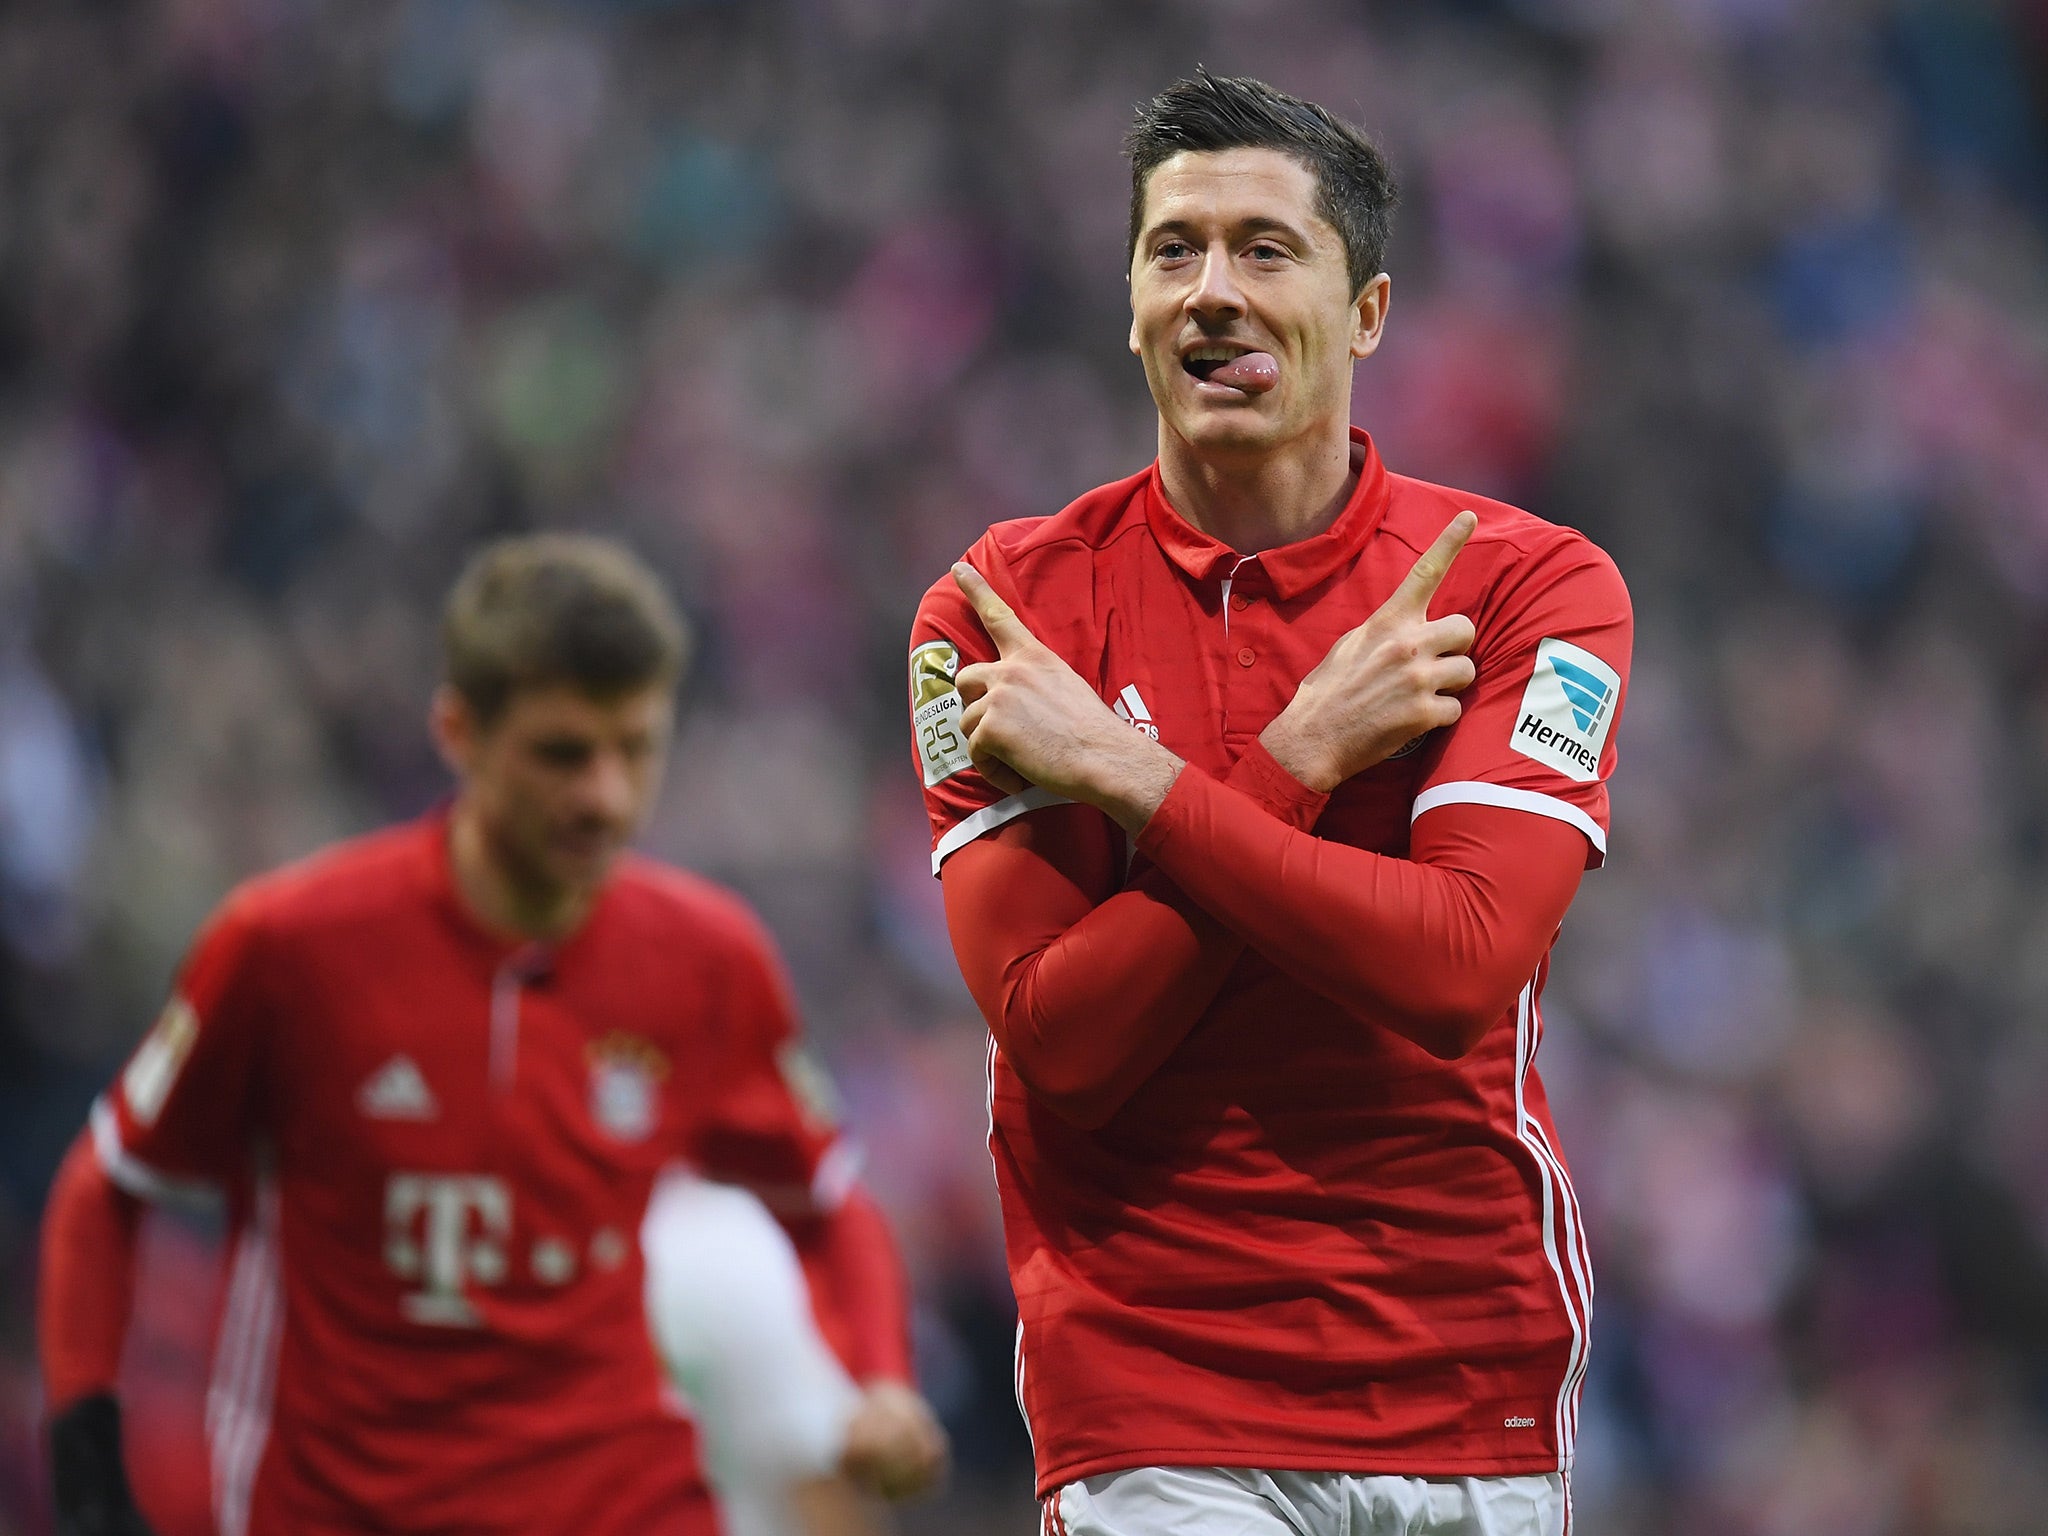 Lewandowski was not best pleased with his place in the final standings